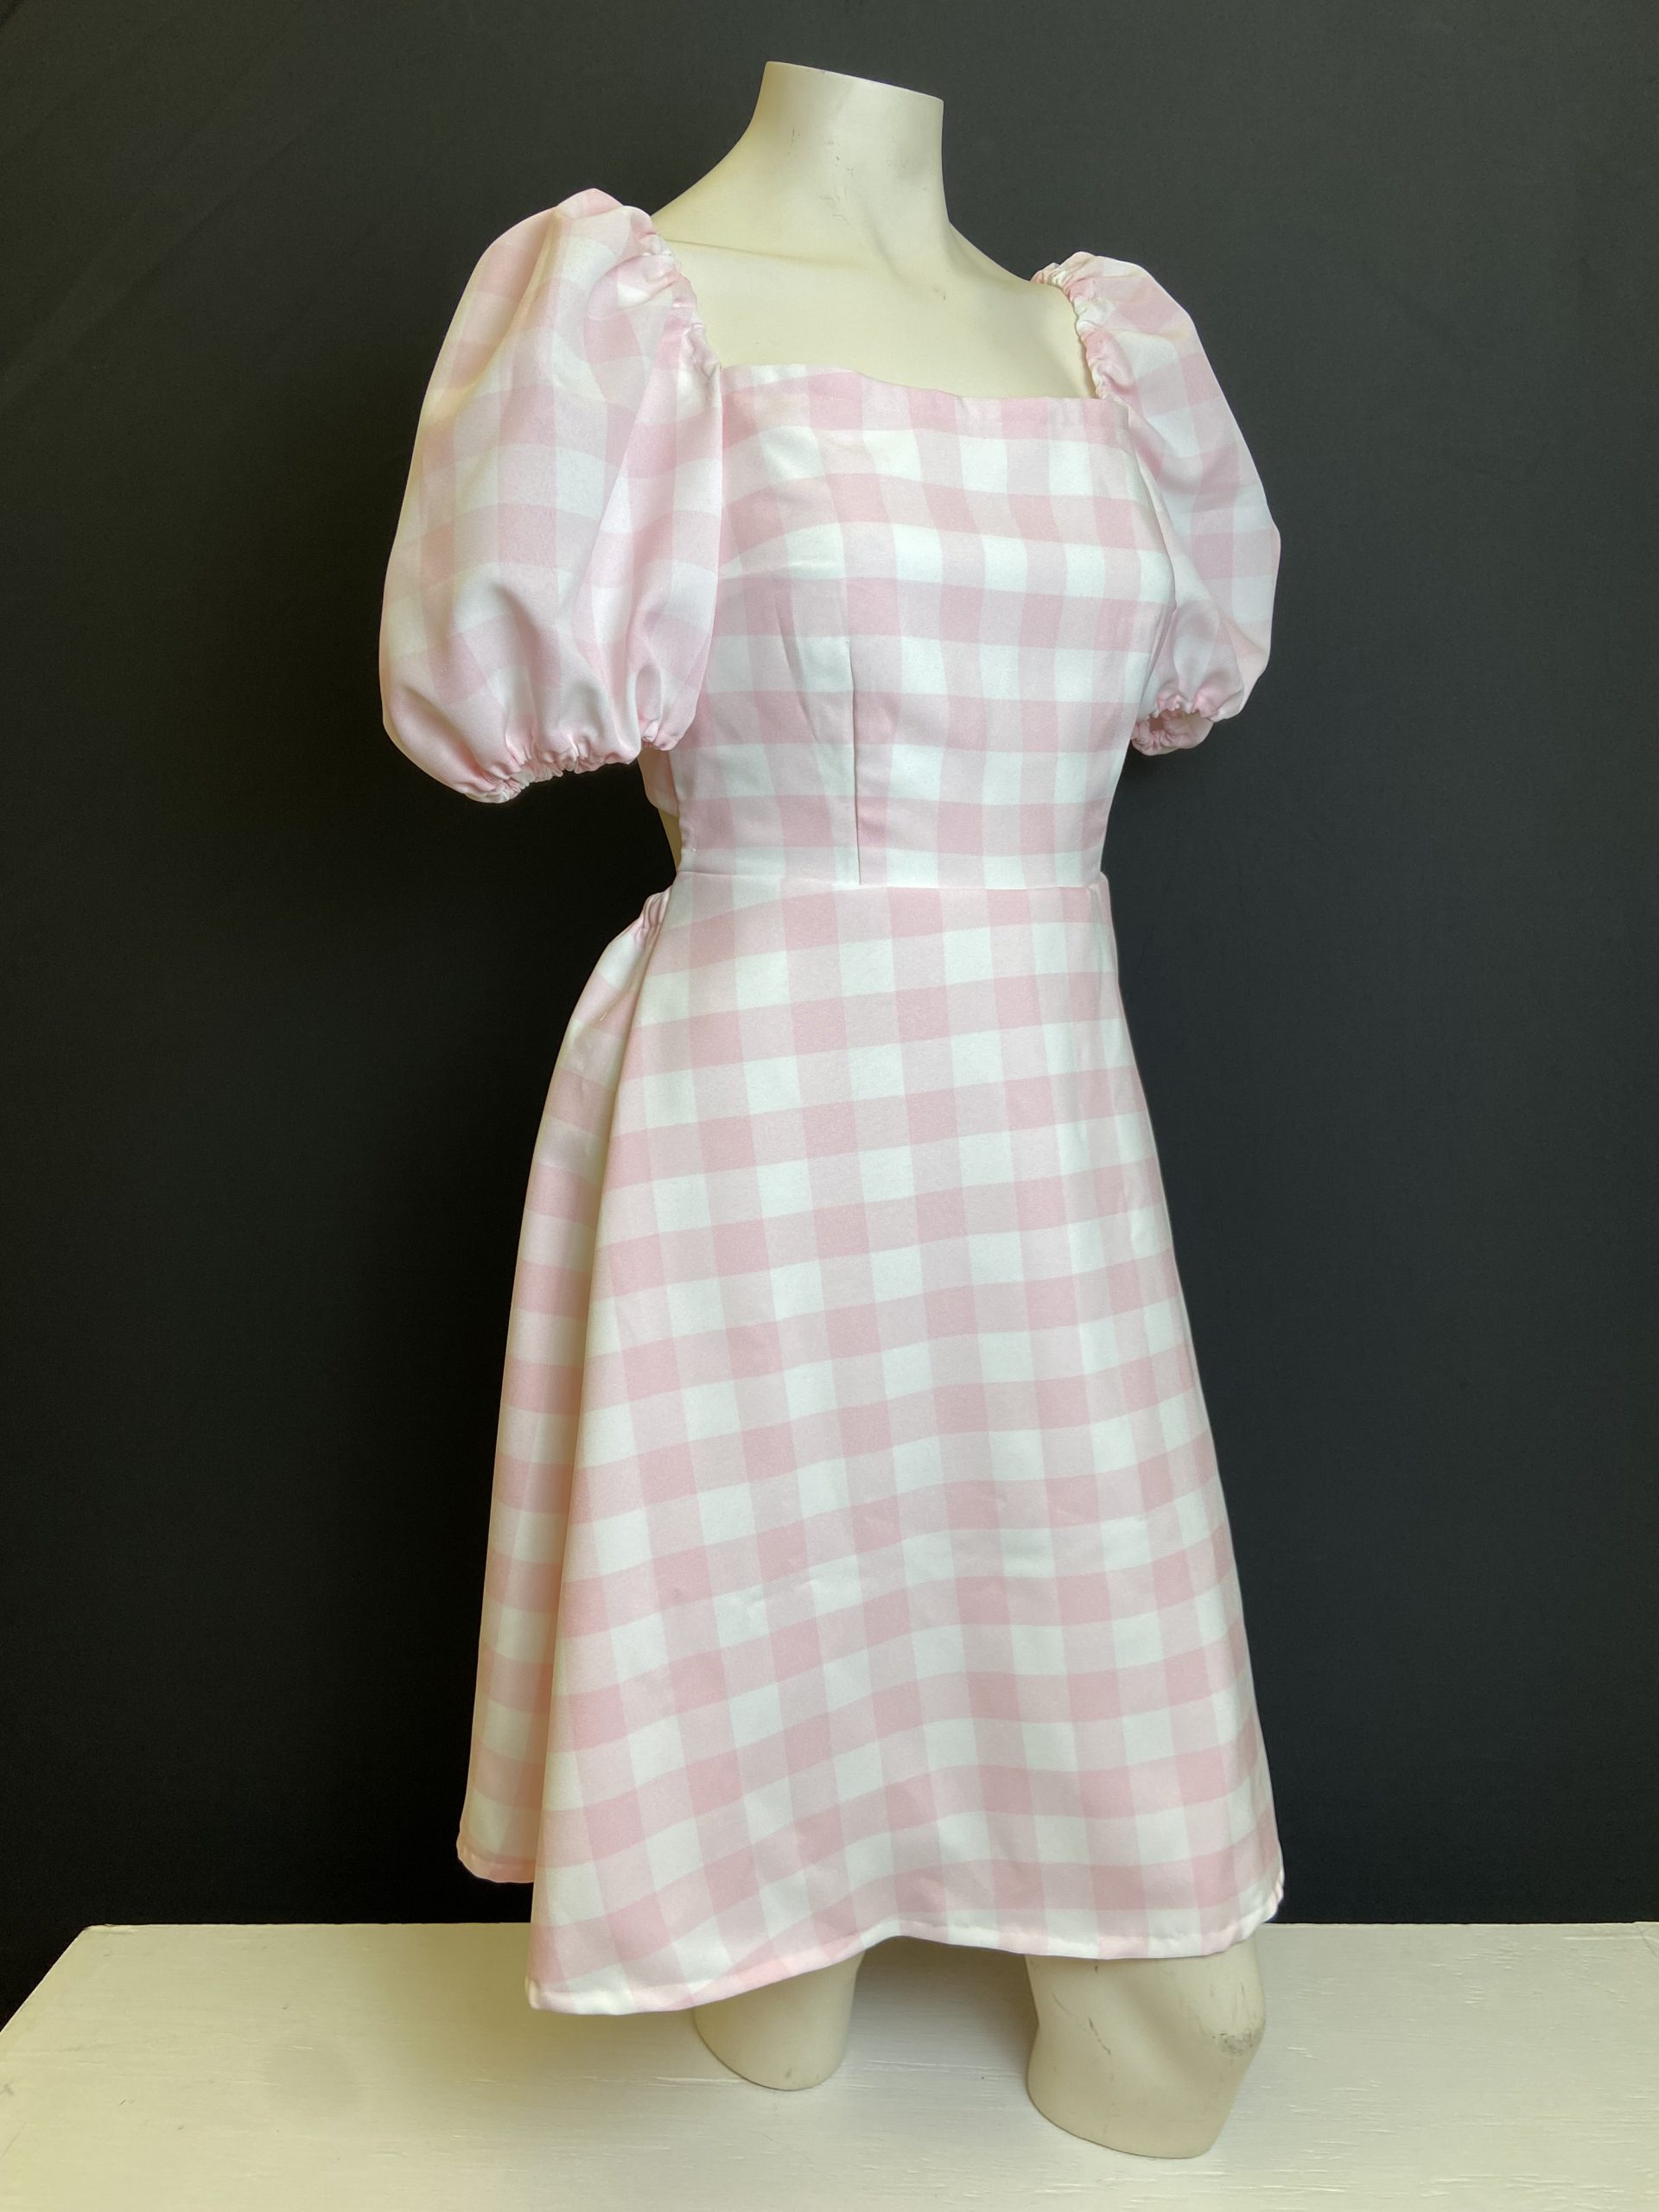 A pink and white gingham dress on a mannequin without a head and arms.